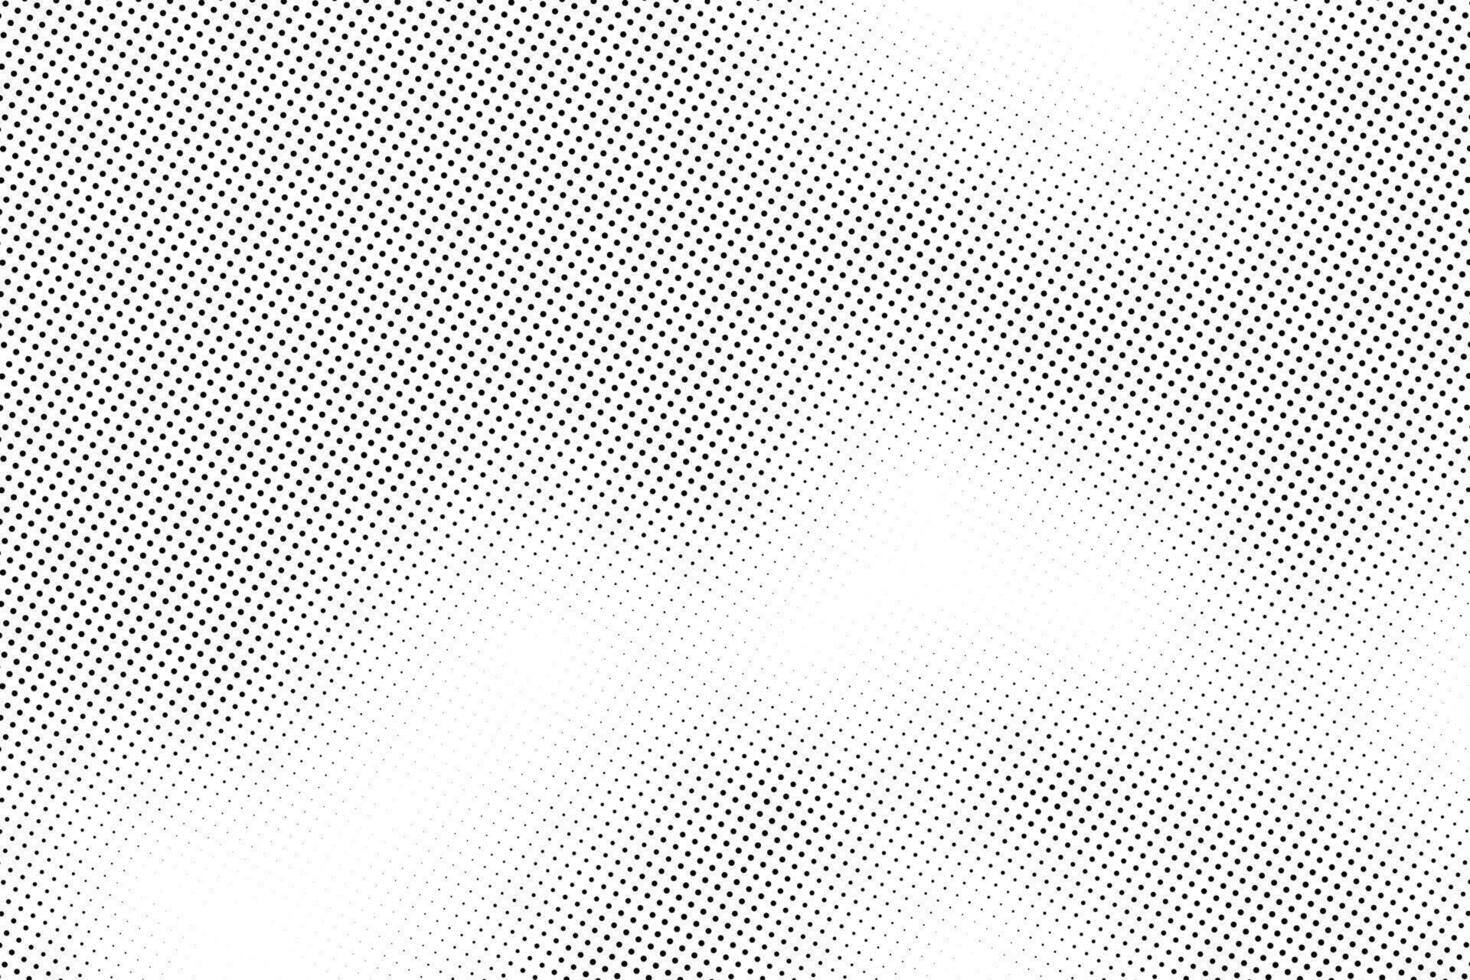 halftone halftone vector background with a spiral shape